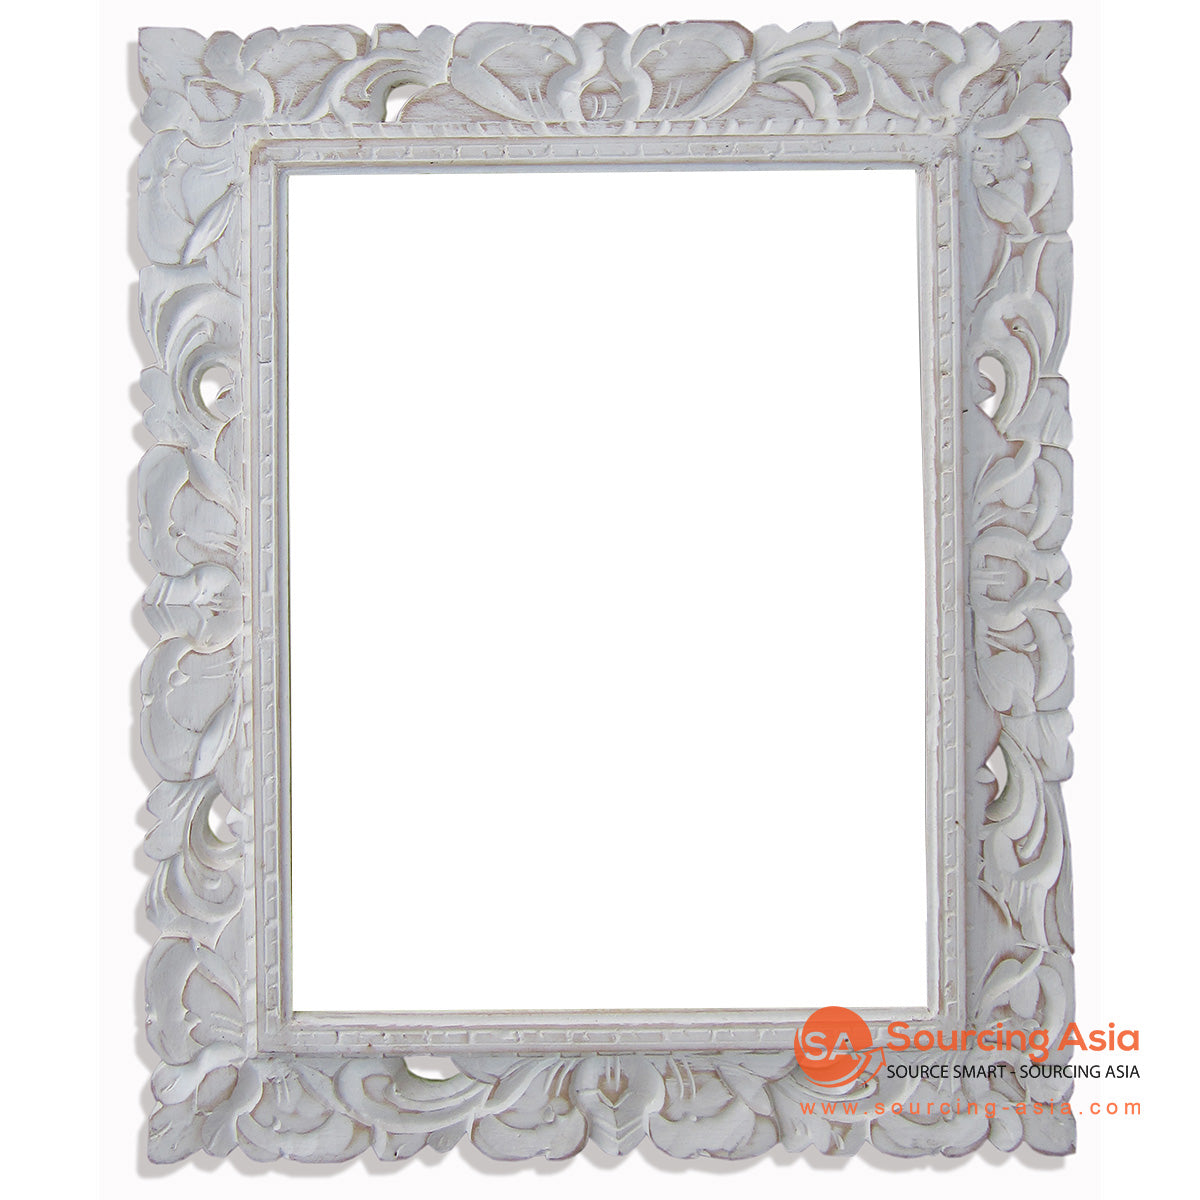 SSU022WW-30X40 WHITE WASH WOODEN MIRROR WITH CARVING